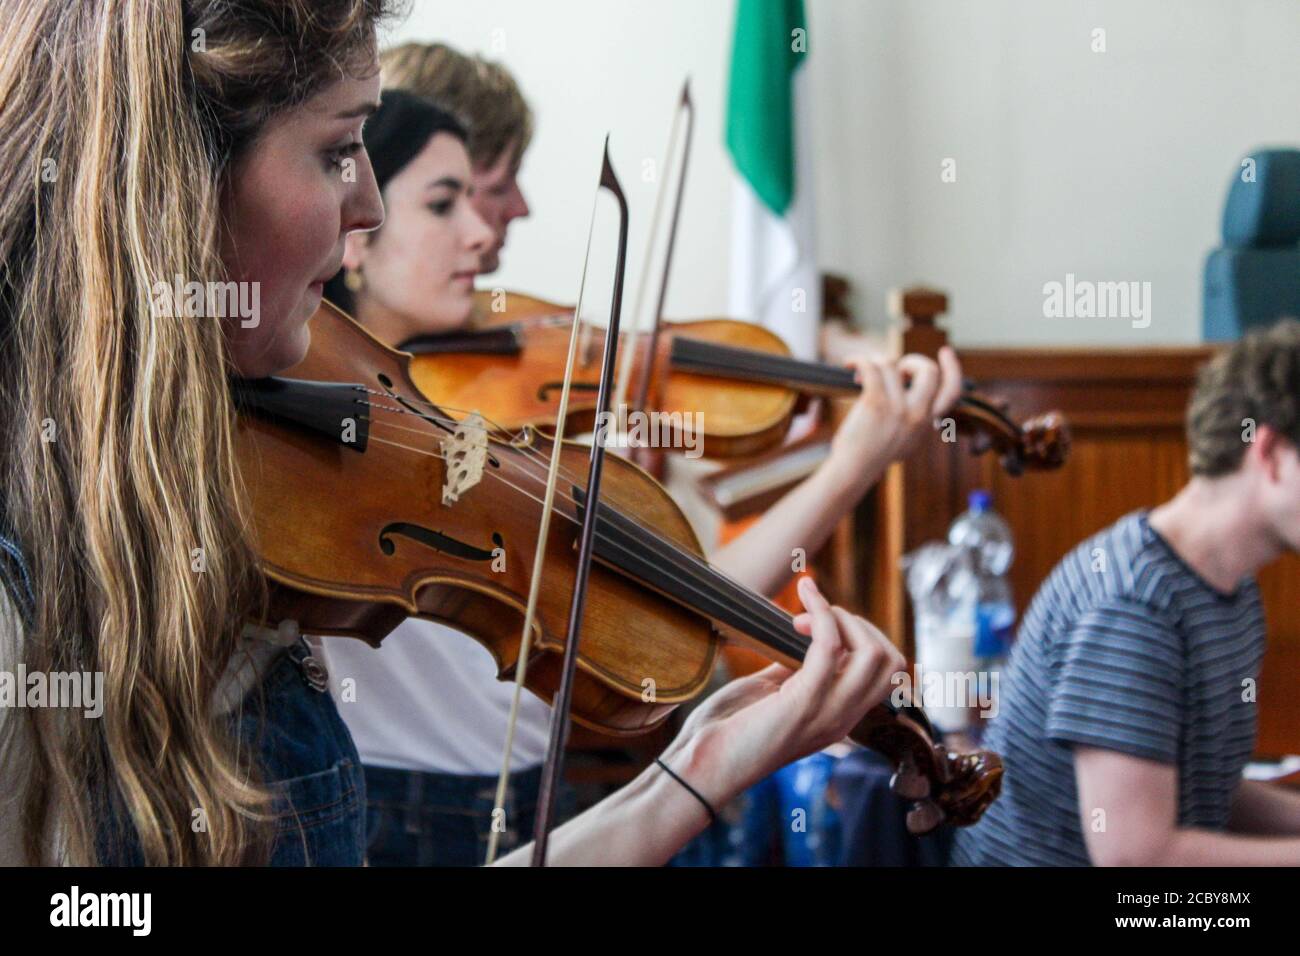 Westland Baroque Ensemble playing at masterclass during the West Cork Chamber Music Festival 2018 in Bantry Co Cork, Ireland. Stock Photo